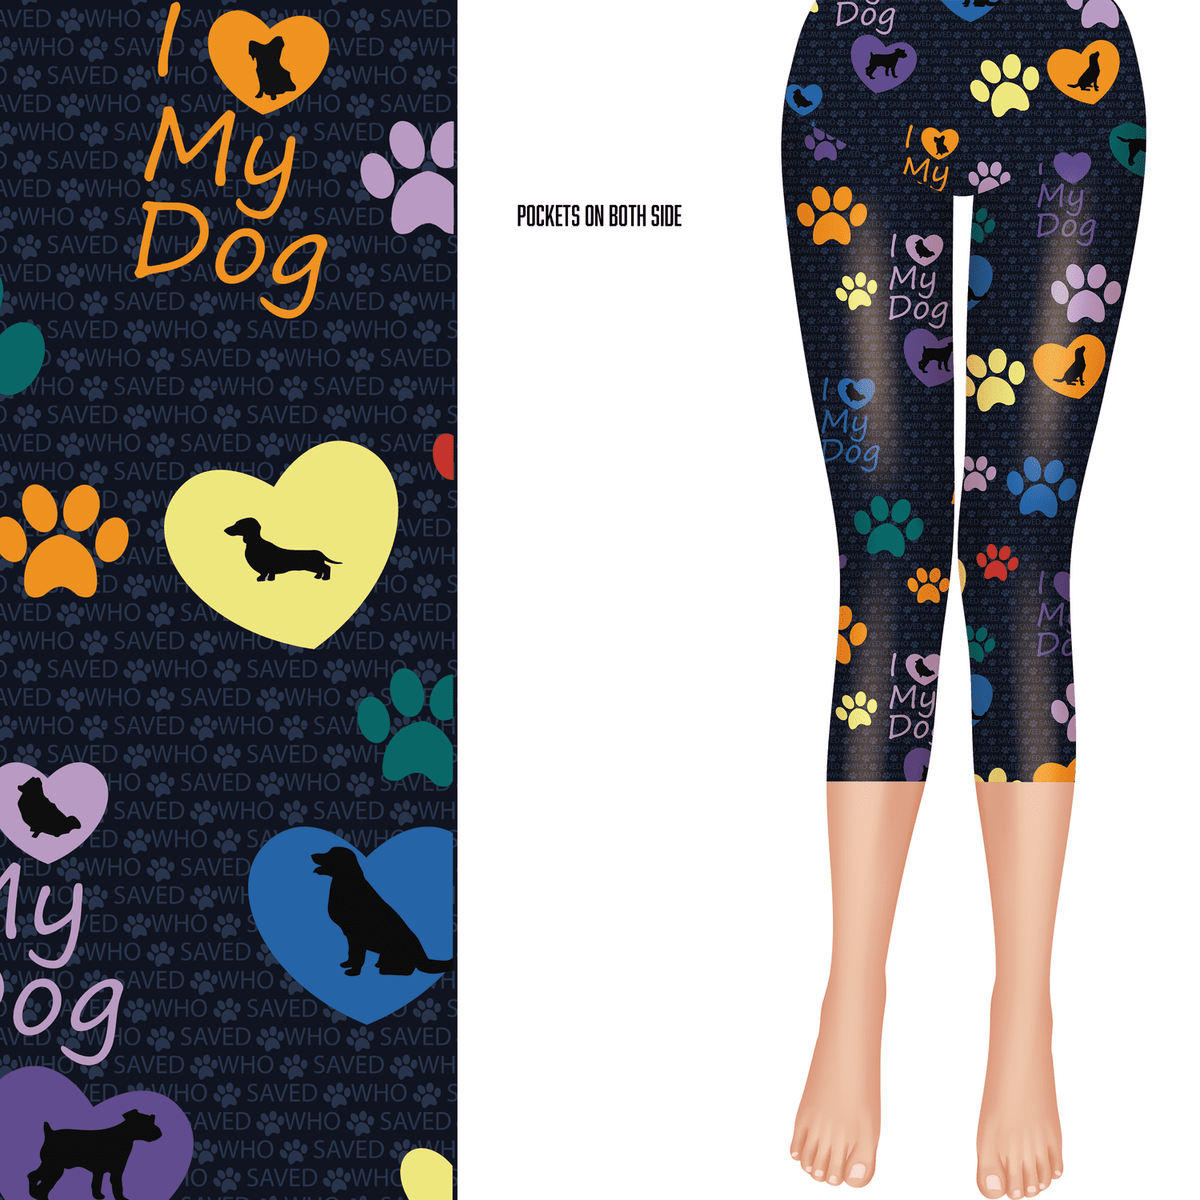 Dog Love Capri Leggings with Hearts and Paw Prints Small Print- Fur Baby - Dog Rescue